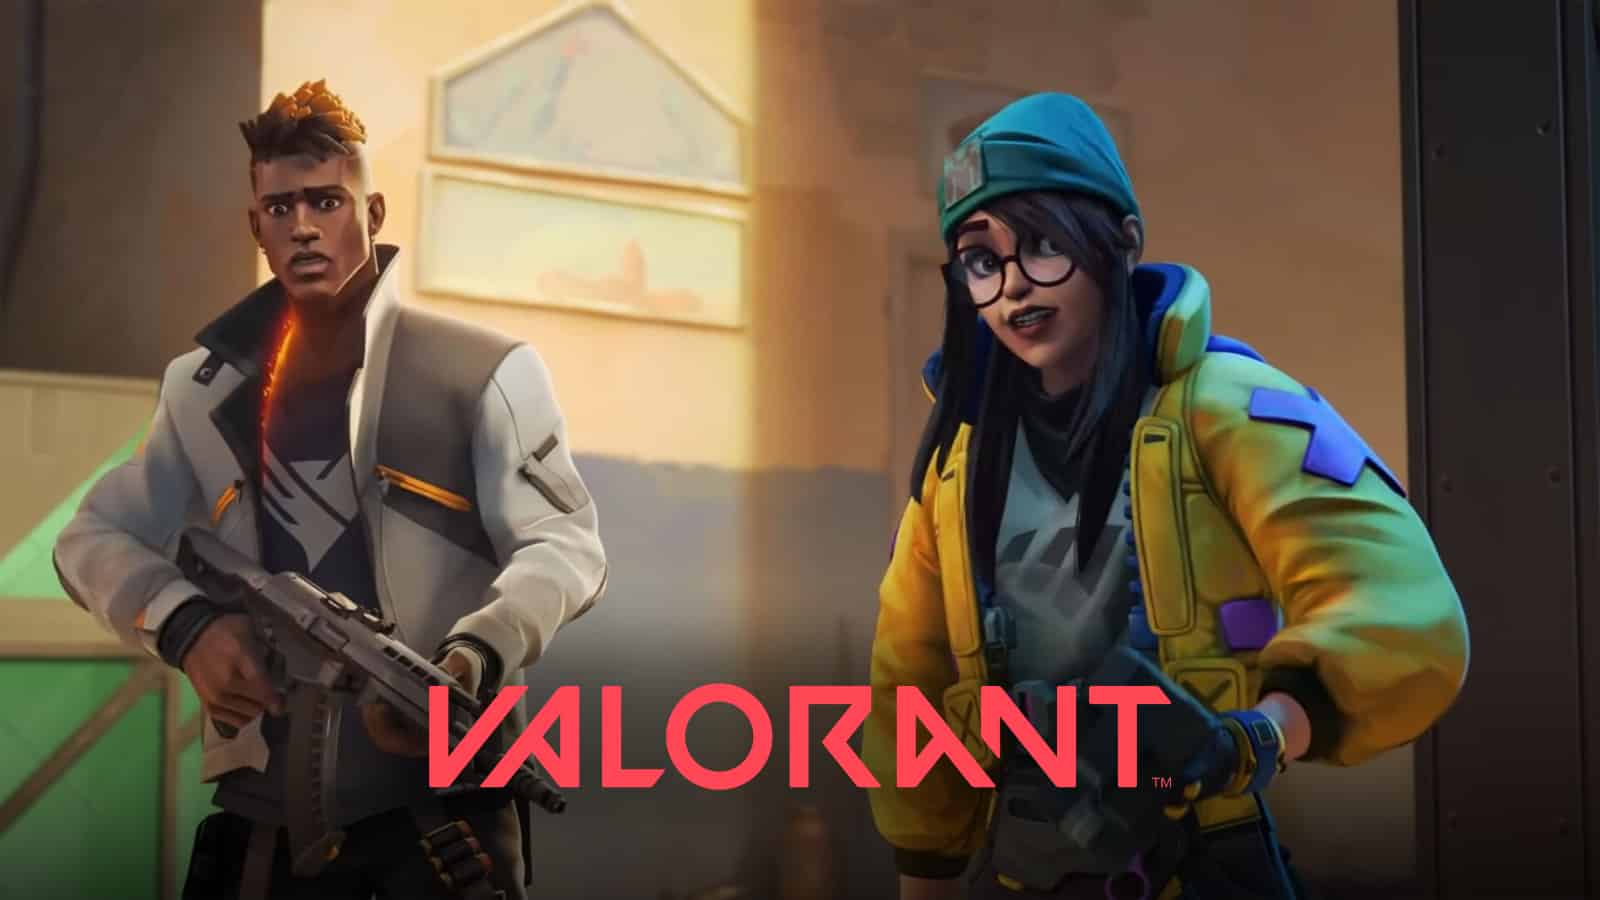 Valorant developers to bring in more anti-smurf changes in 2023